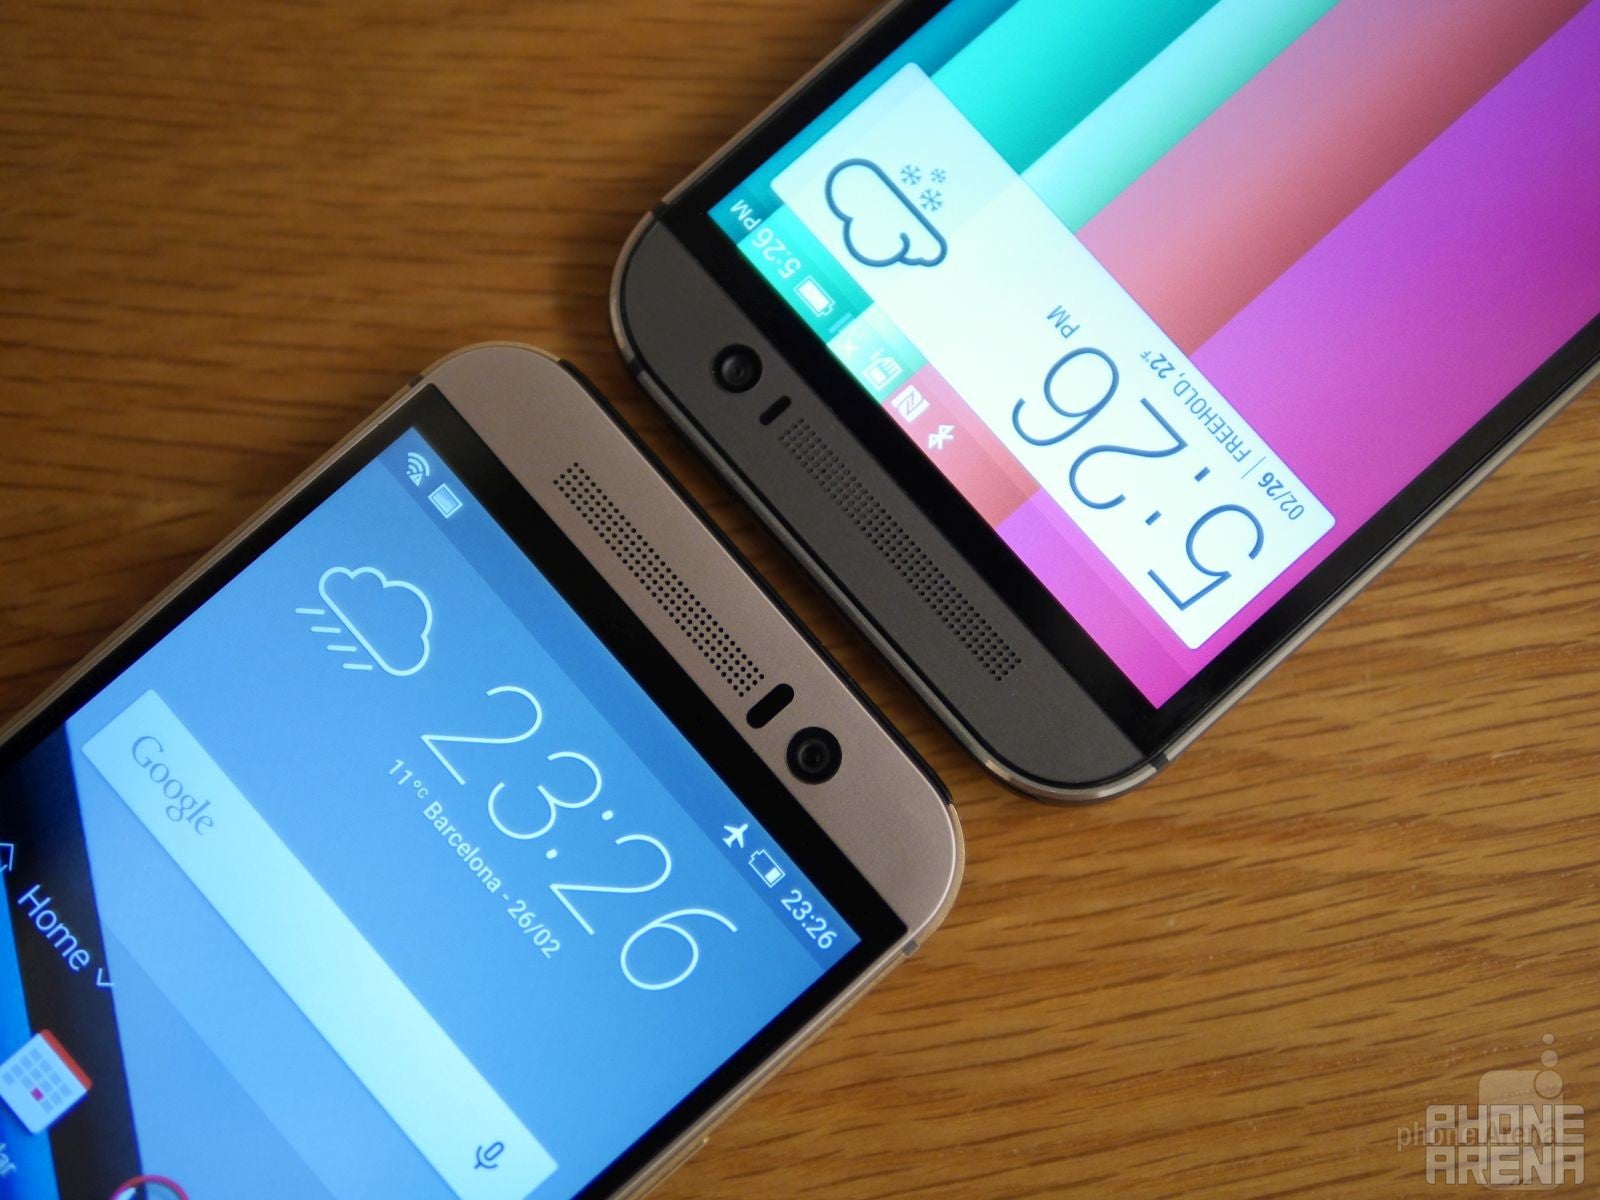 HTC One M9 vs HTC One M8: first look